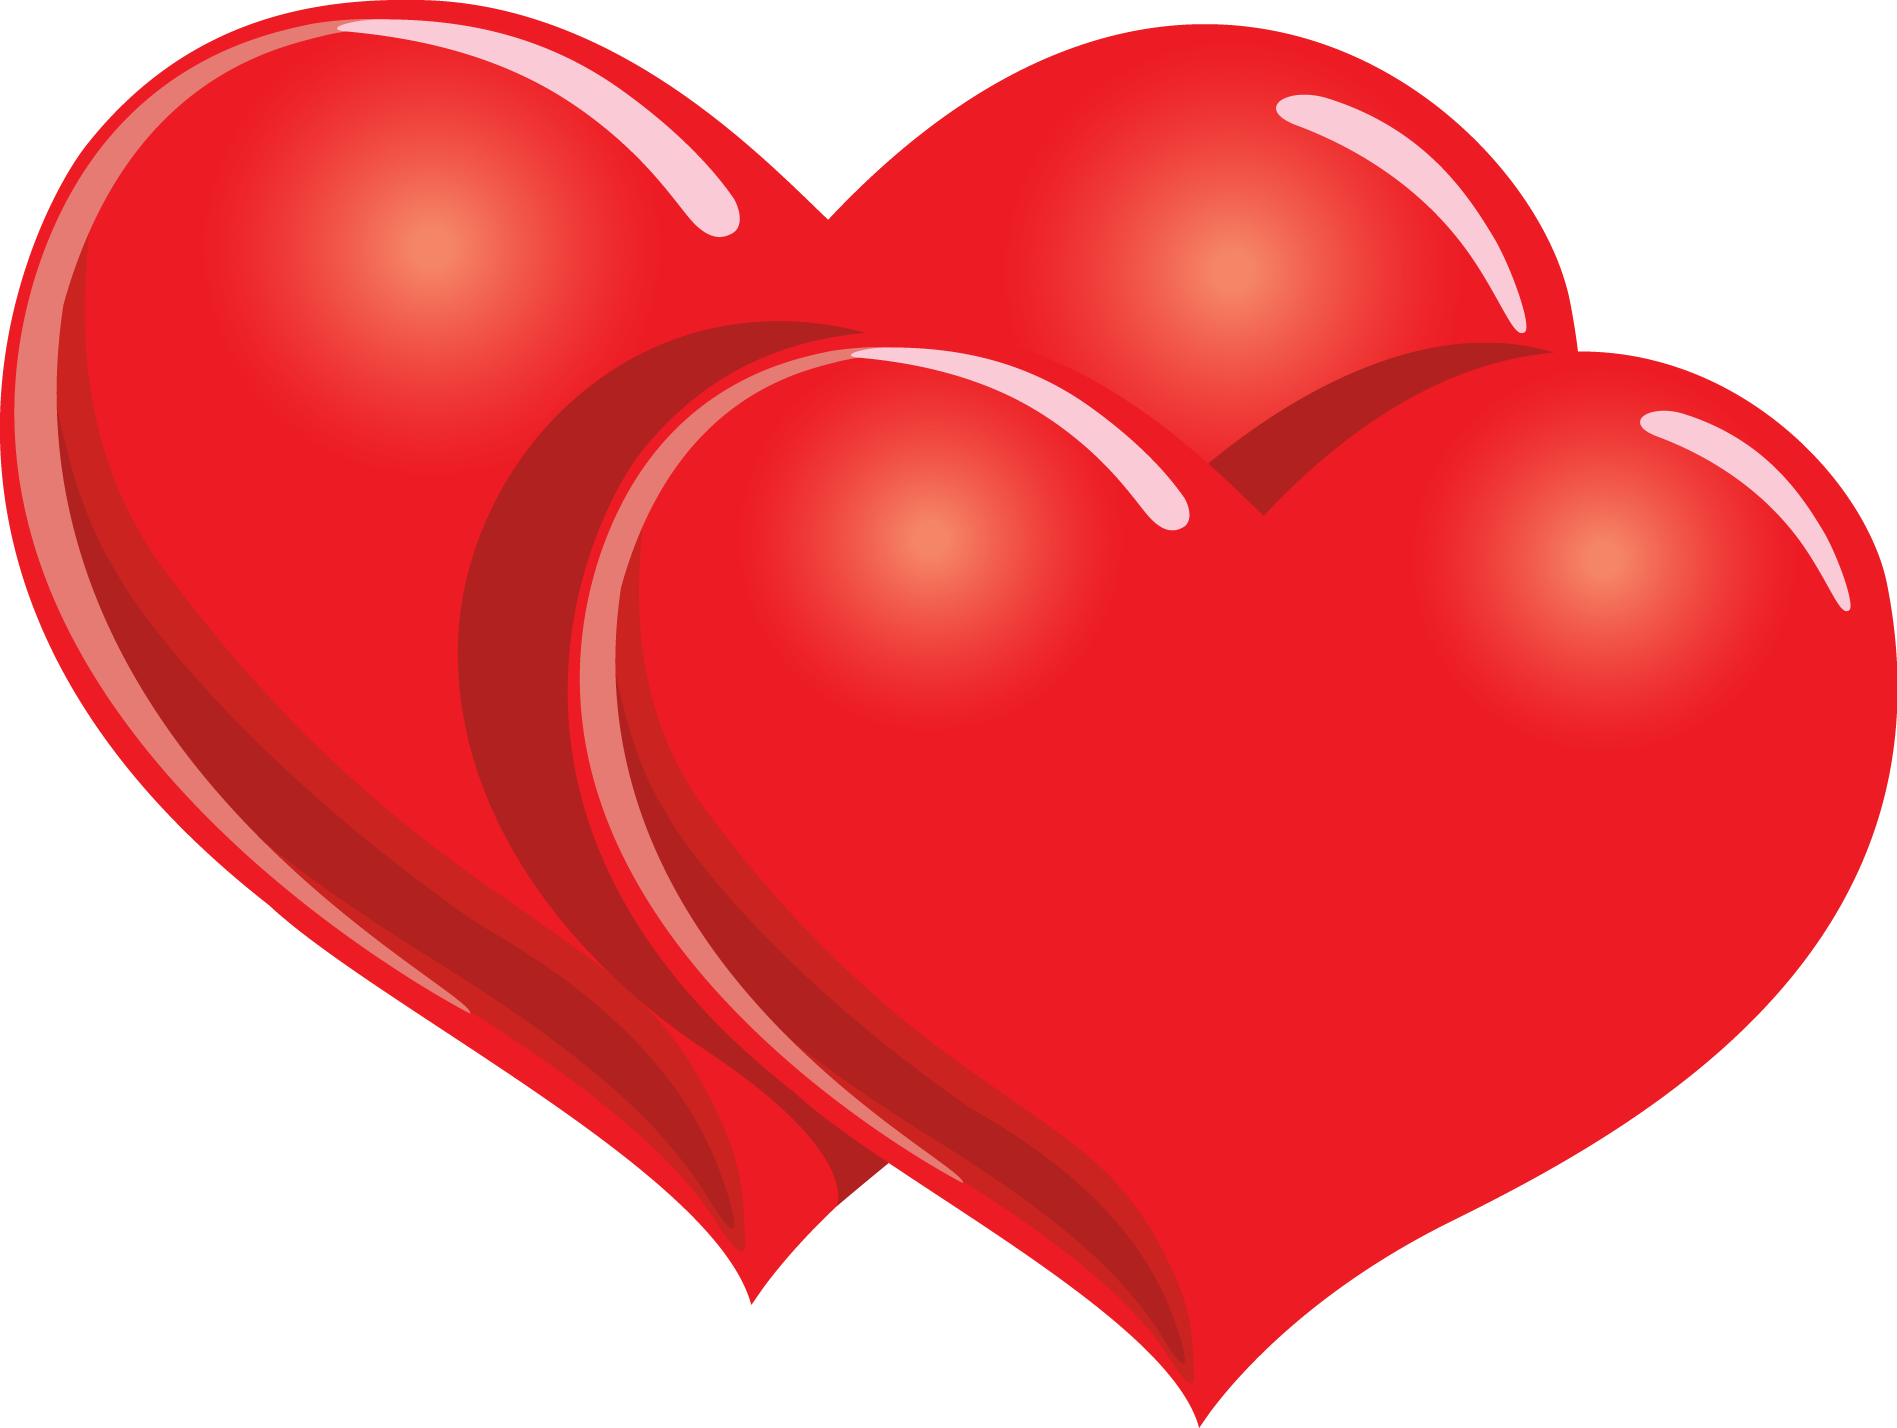 Free Two Hearts Clipart, Download Free Clip Art, Free Clip ...